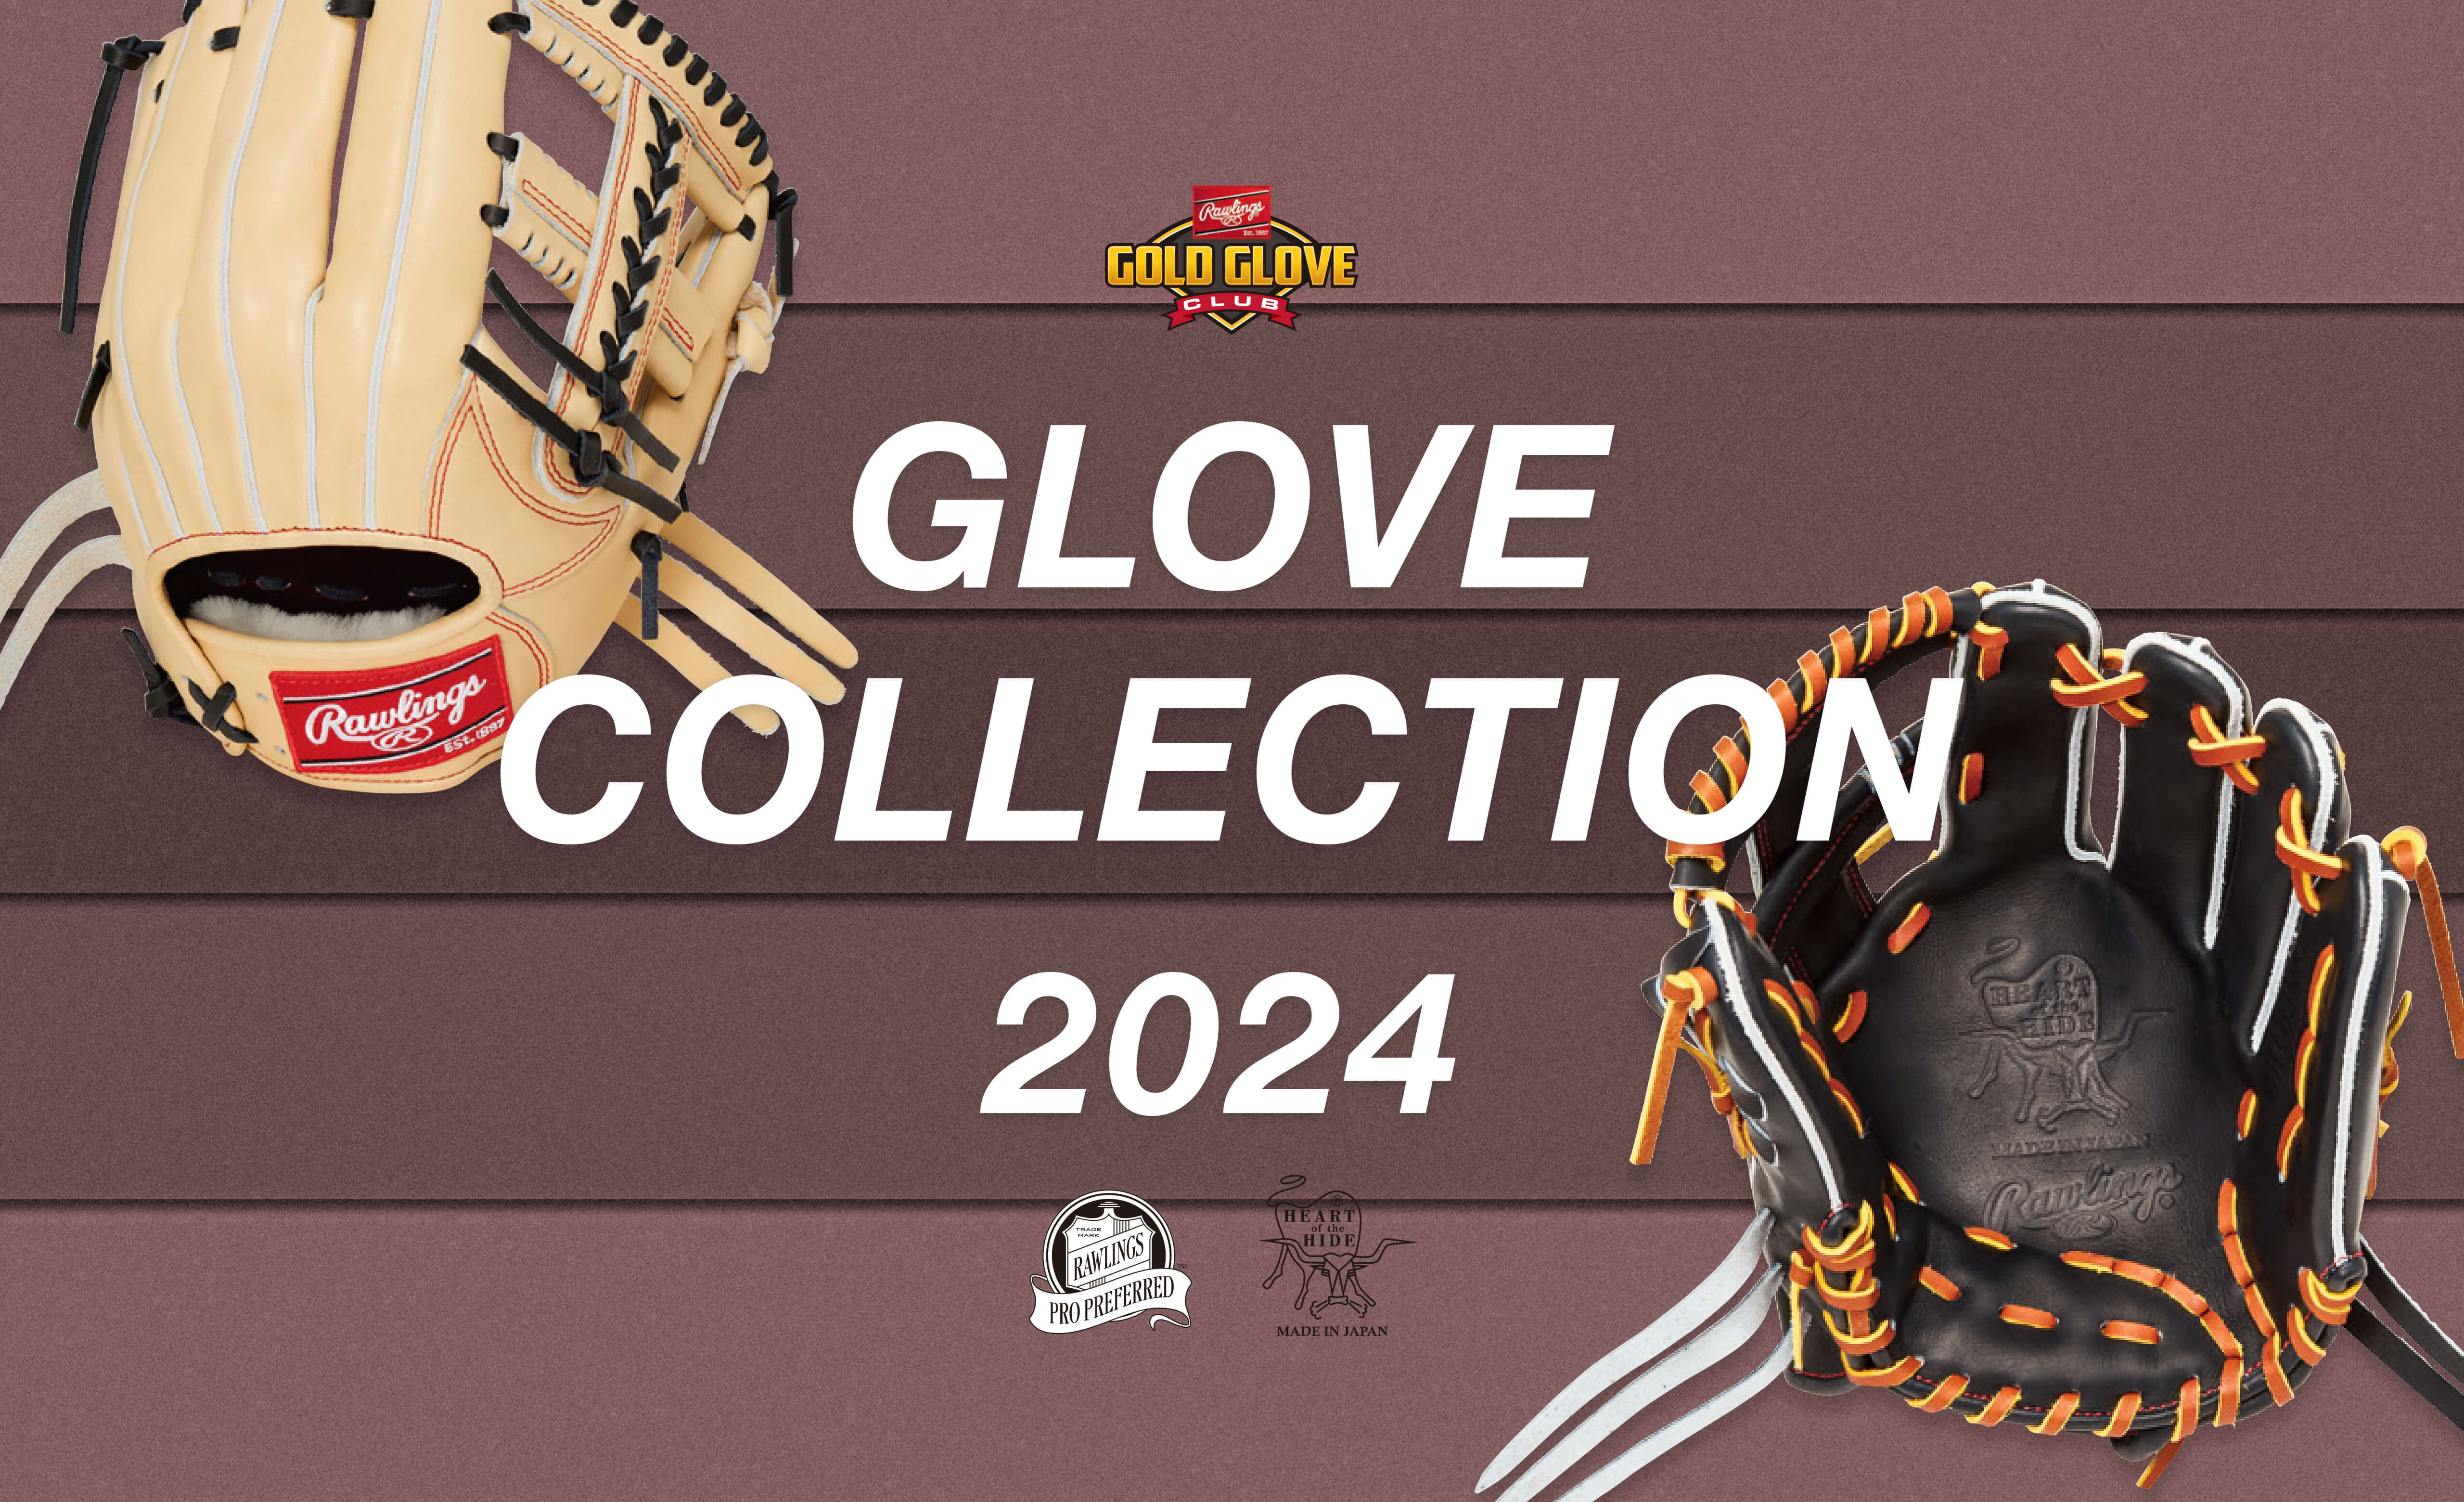 GLOVE COLLECTION 2024